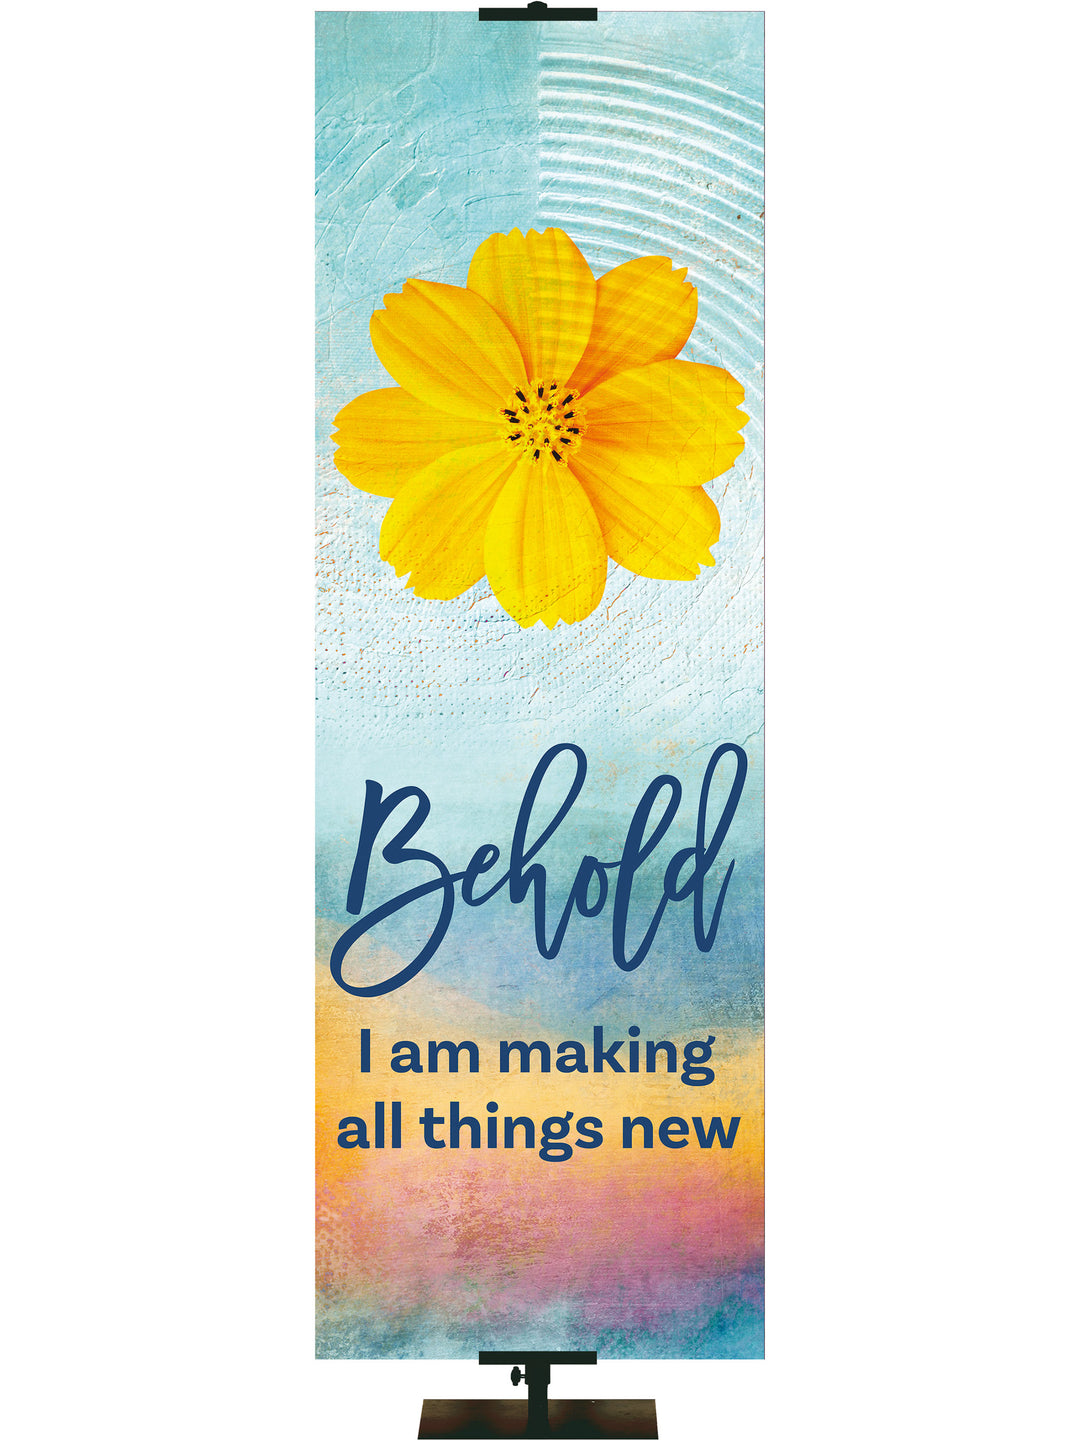 A Joyous Spring Behold I am Making All Things New - Year Round Banners - PraiseBanners